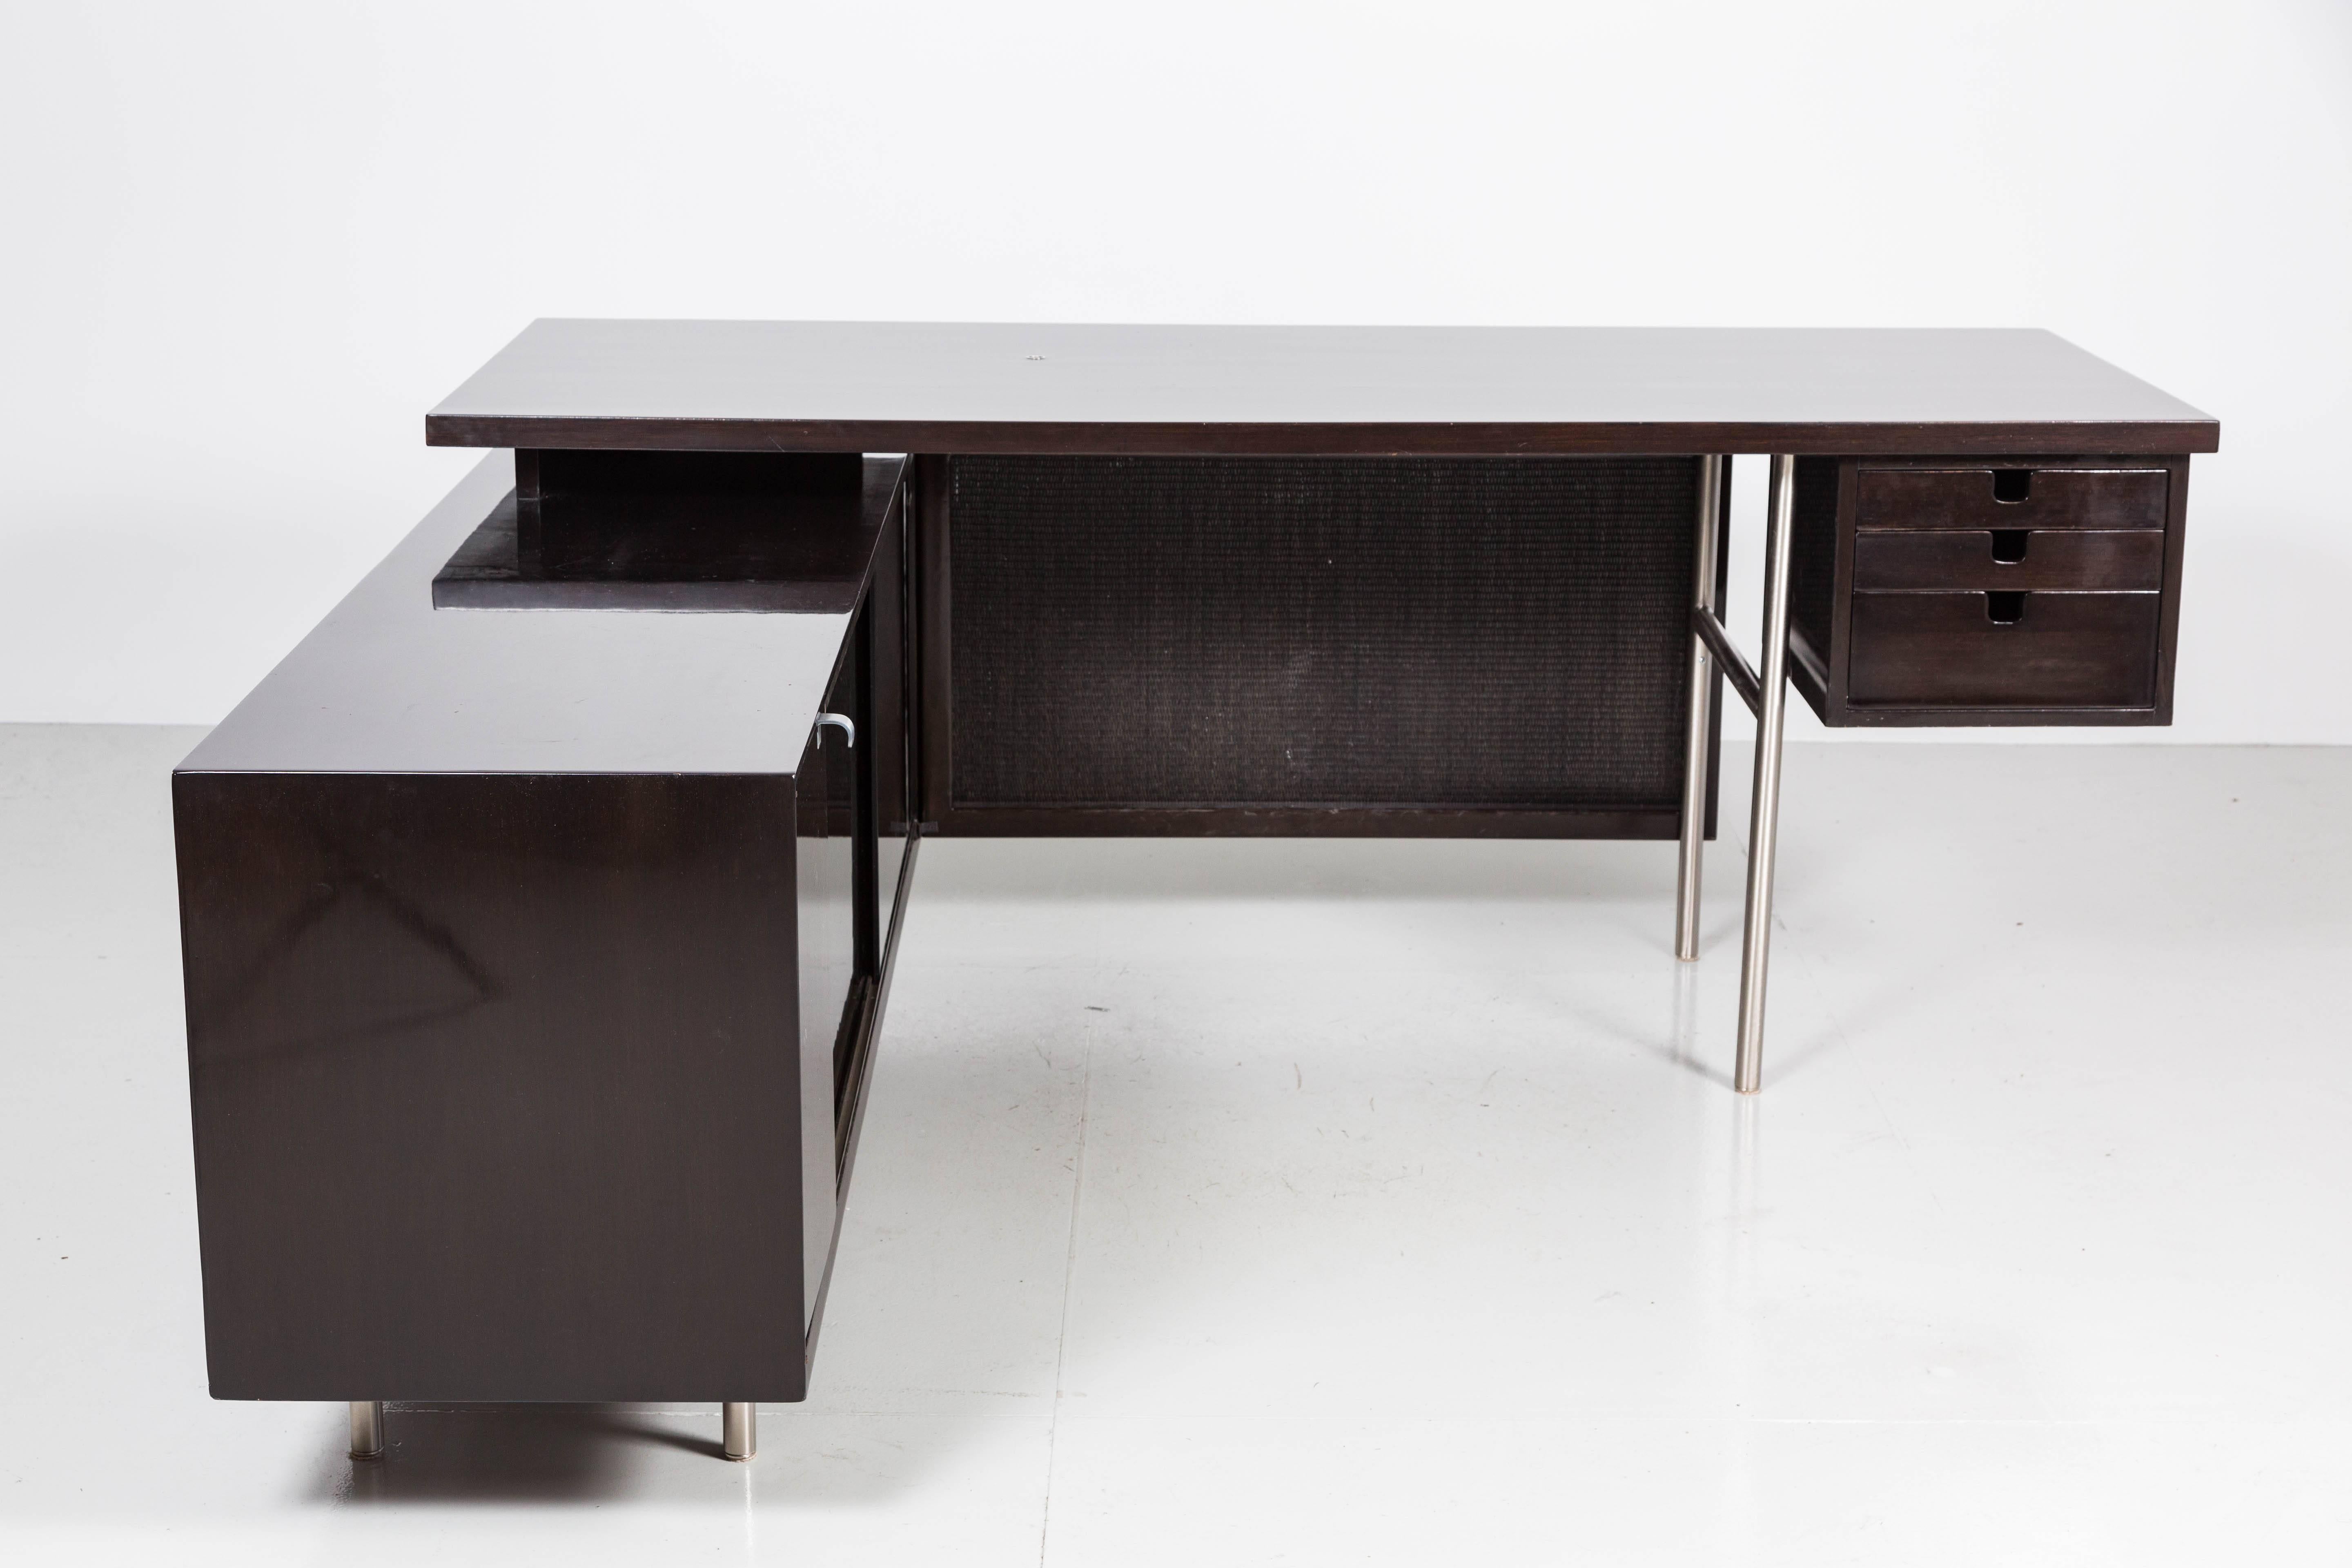 Handsome George Nelson for Herman Miller walnut desk with floating top, aluminum legs and caned modesty panel. Credenza return has ample storage including two interior shelves, two pull-out drawers and one cabinet.
Newly re-finished in ebony finish